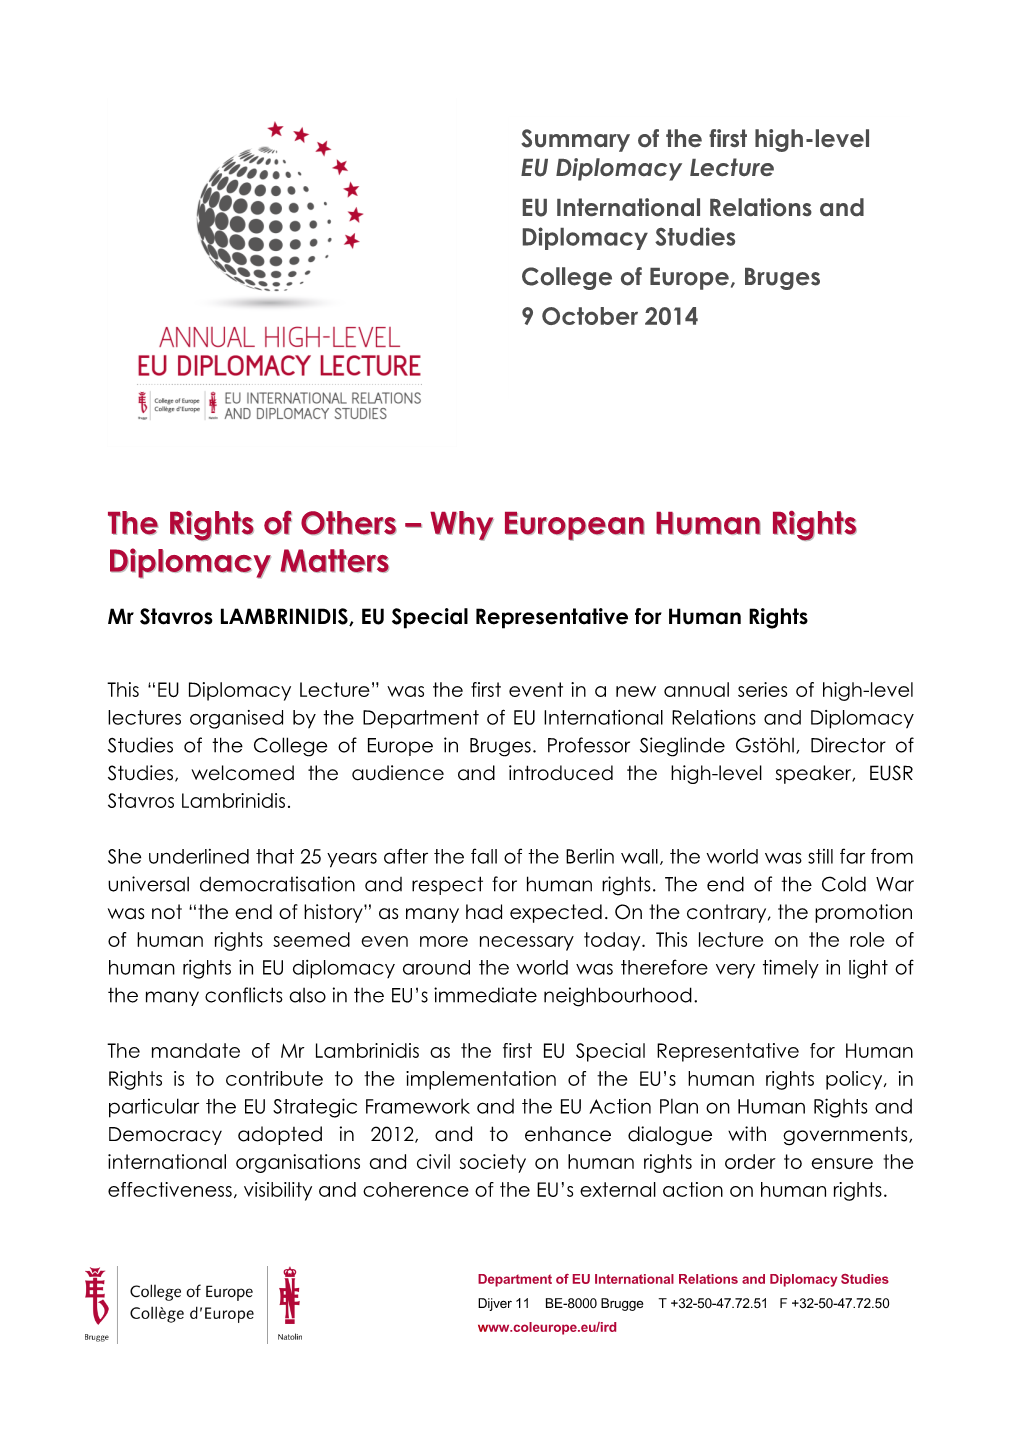 Why European Human Rights Diplomacy Matters